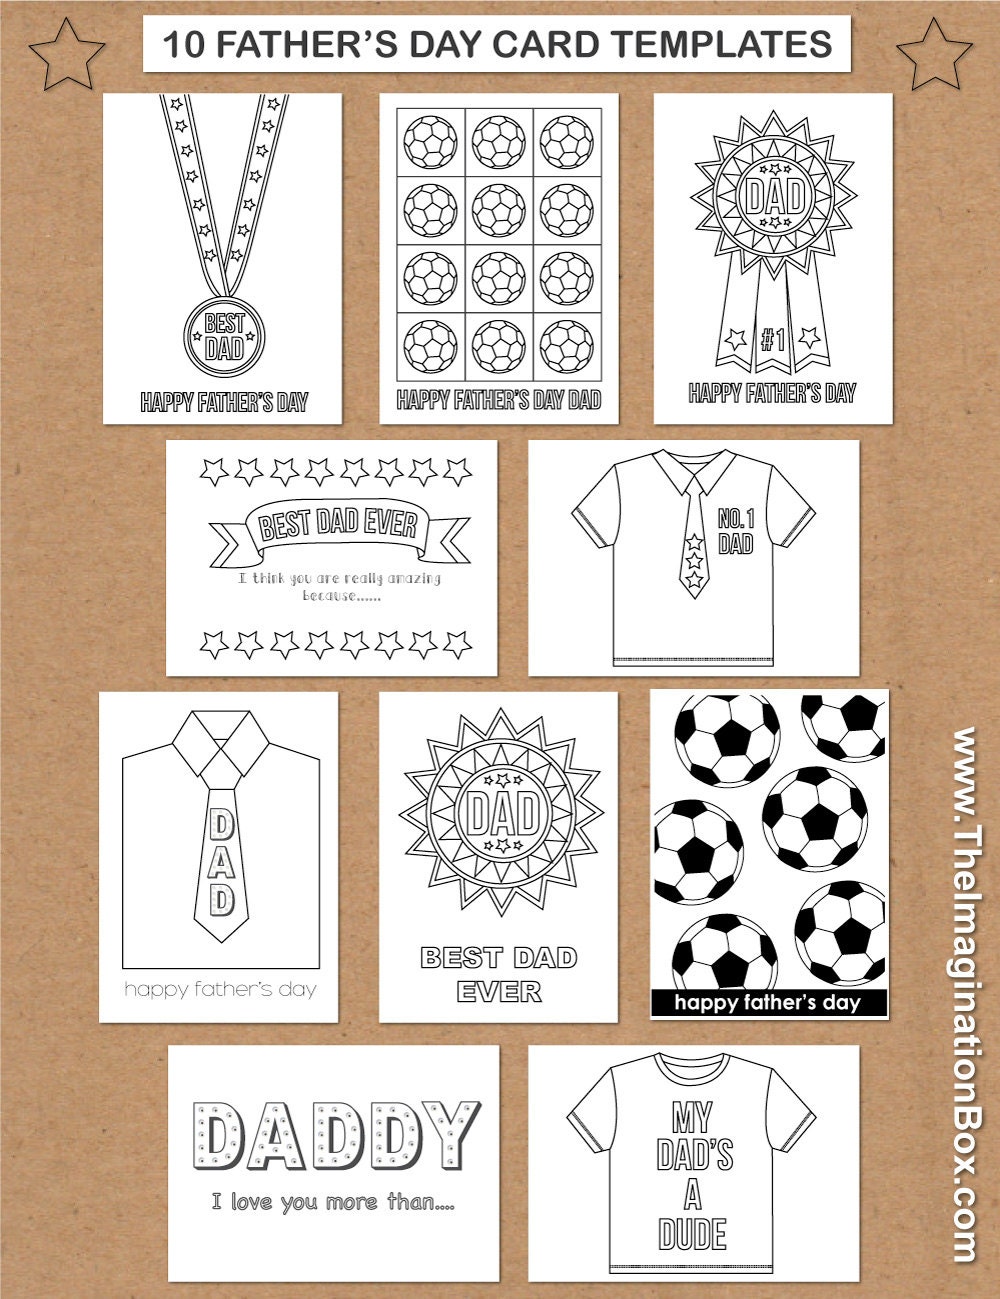 10 Father's Day Card Templates for kids to print and